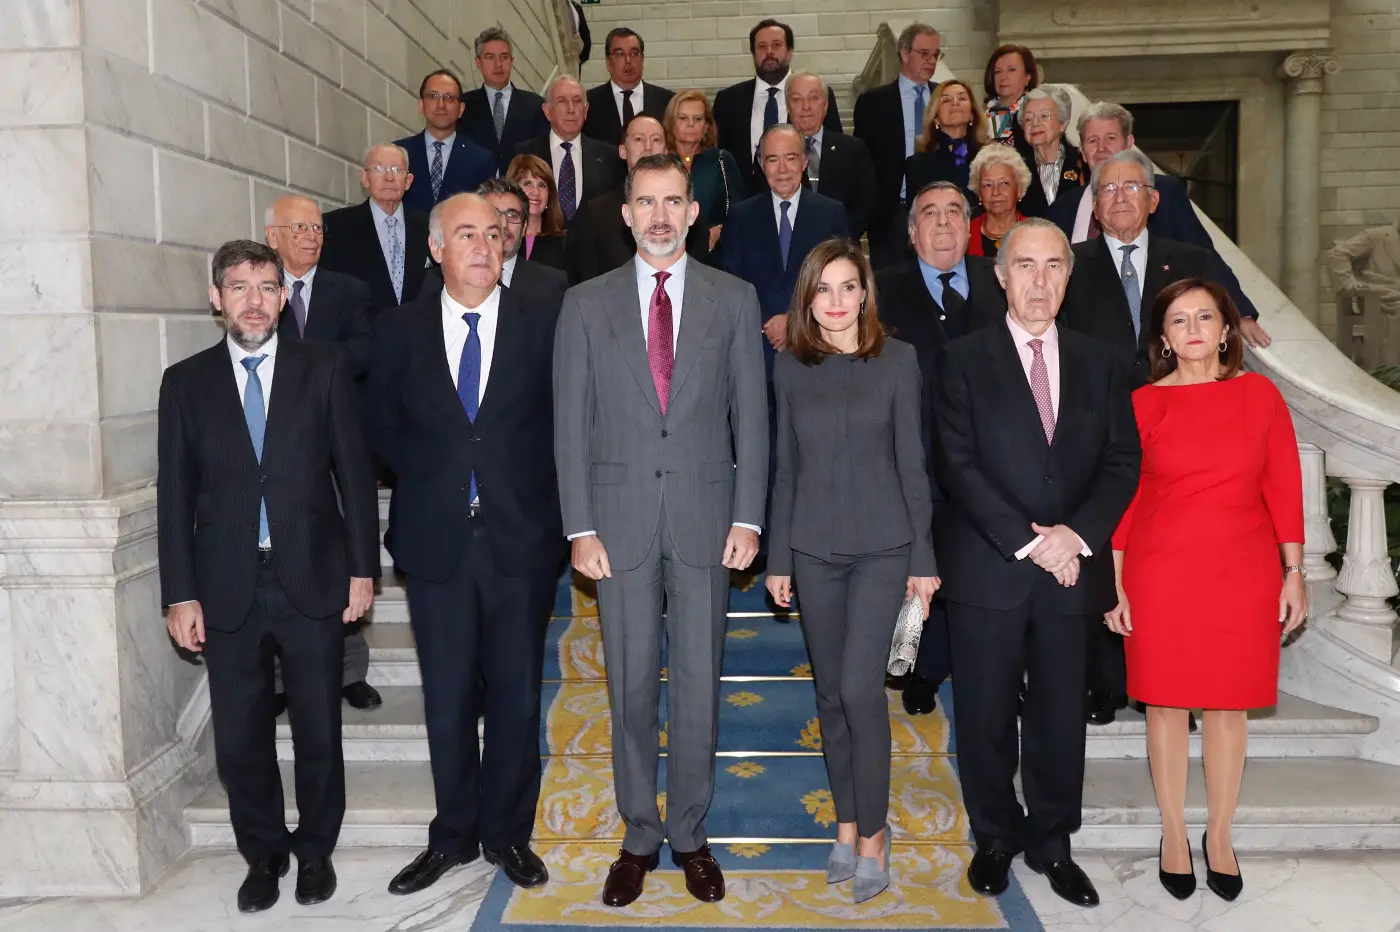 Queen Letizia’s sophisticated look for National Library of Spain Board Meeting